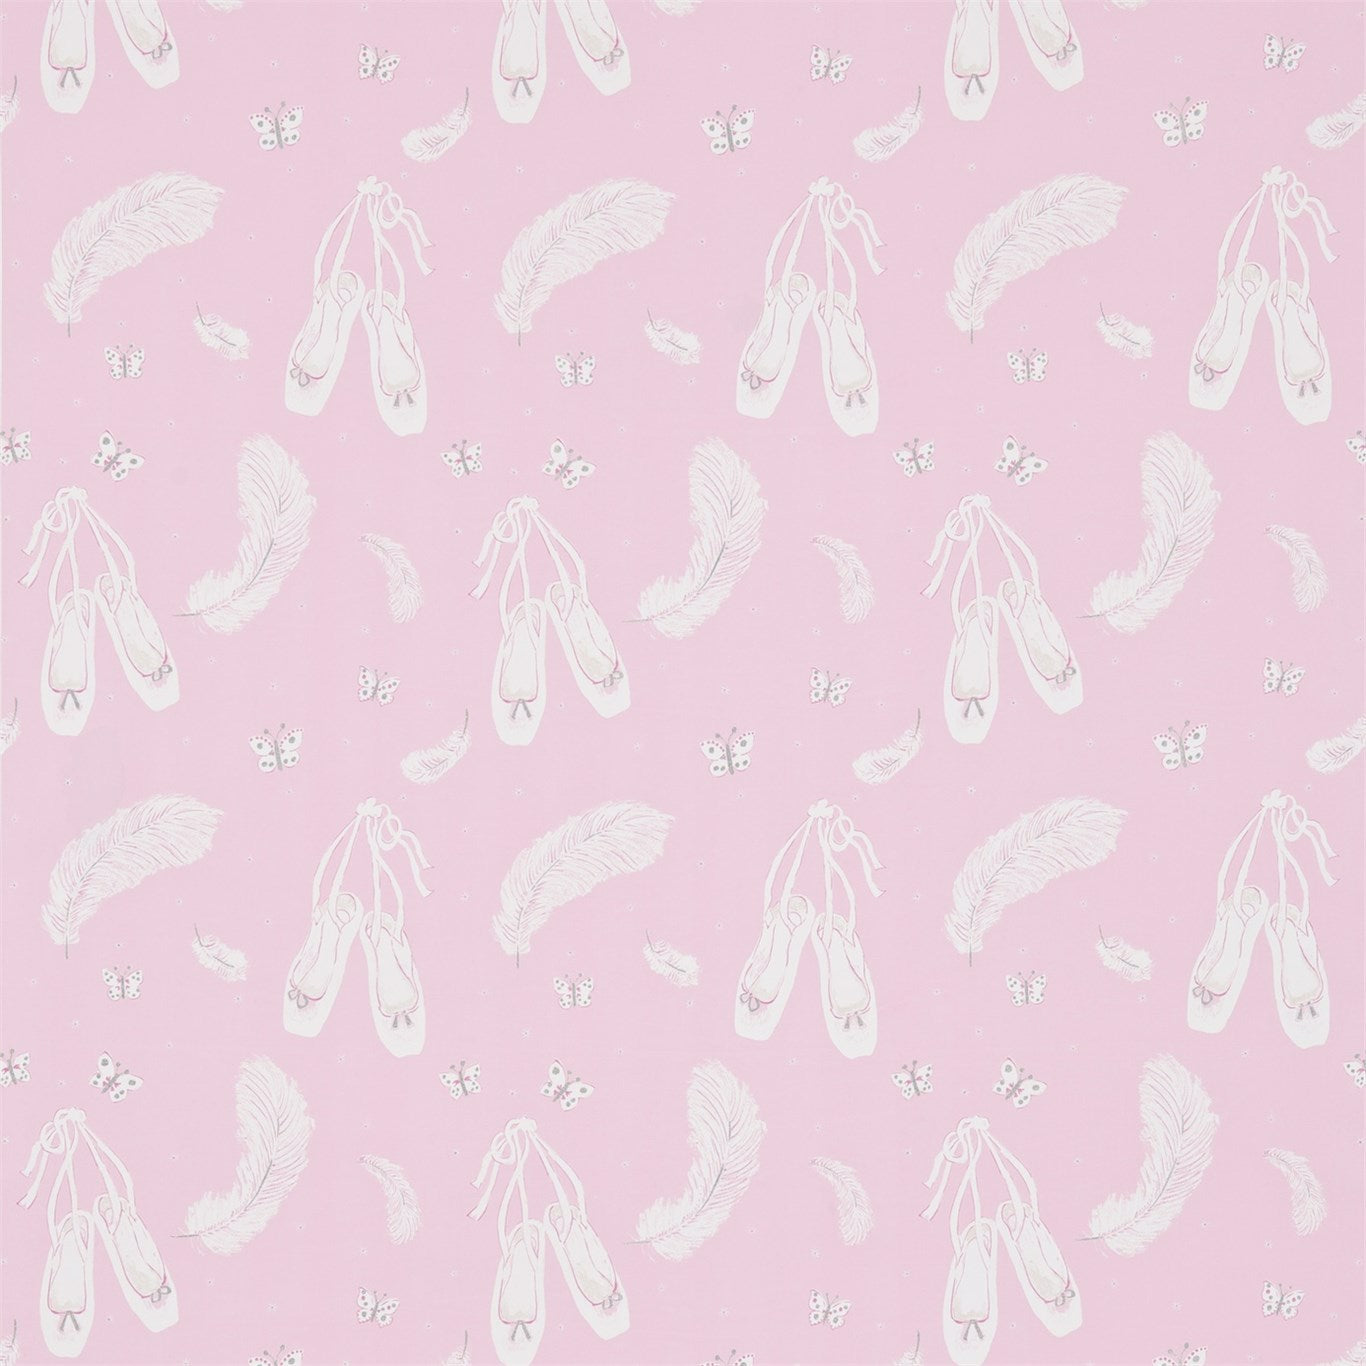 Ballet Shoes Fabric by Sanderson - DLIT223917 - Pink